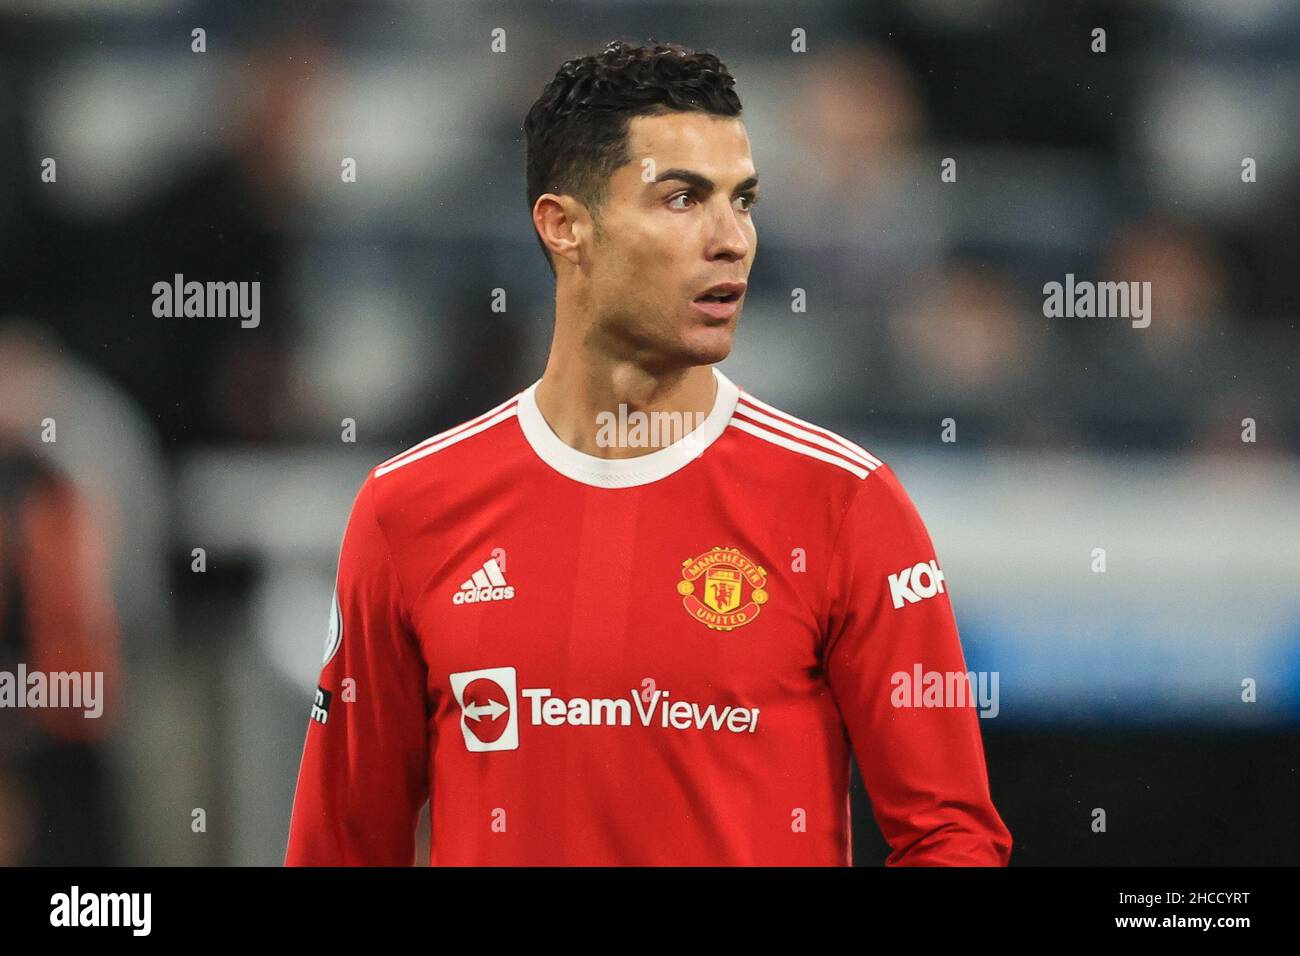 Cristiano Ronaldo #7 of Manchester United during the game in, on 12/27/2021. (Photo by Mark Cosgrove/News Images/Sipa USA) Credit: Sipa USA/Alamy Live News Stock Photo